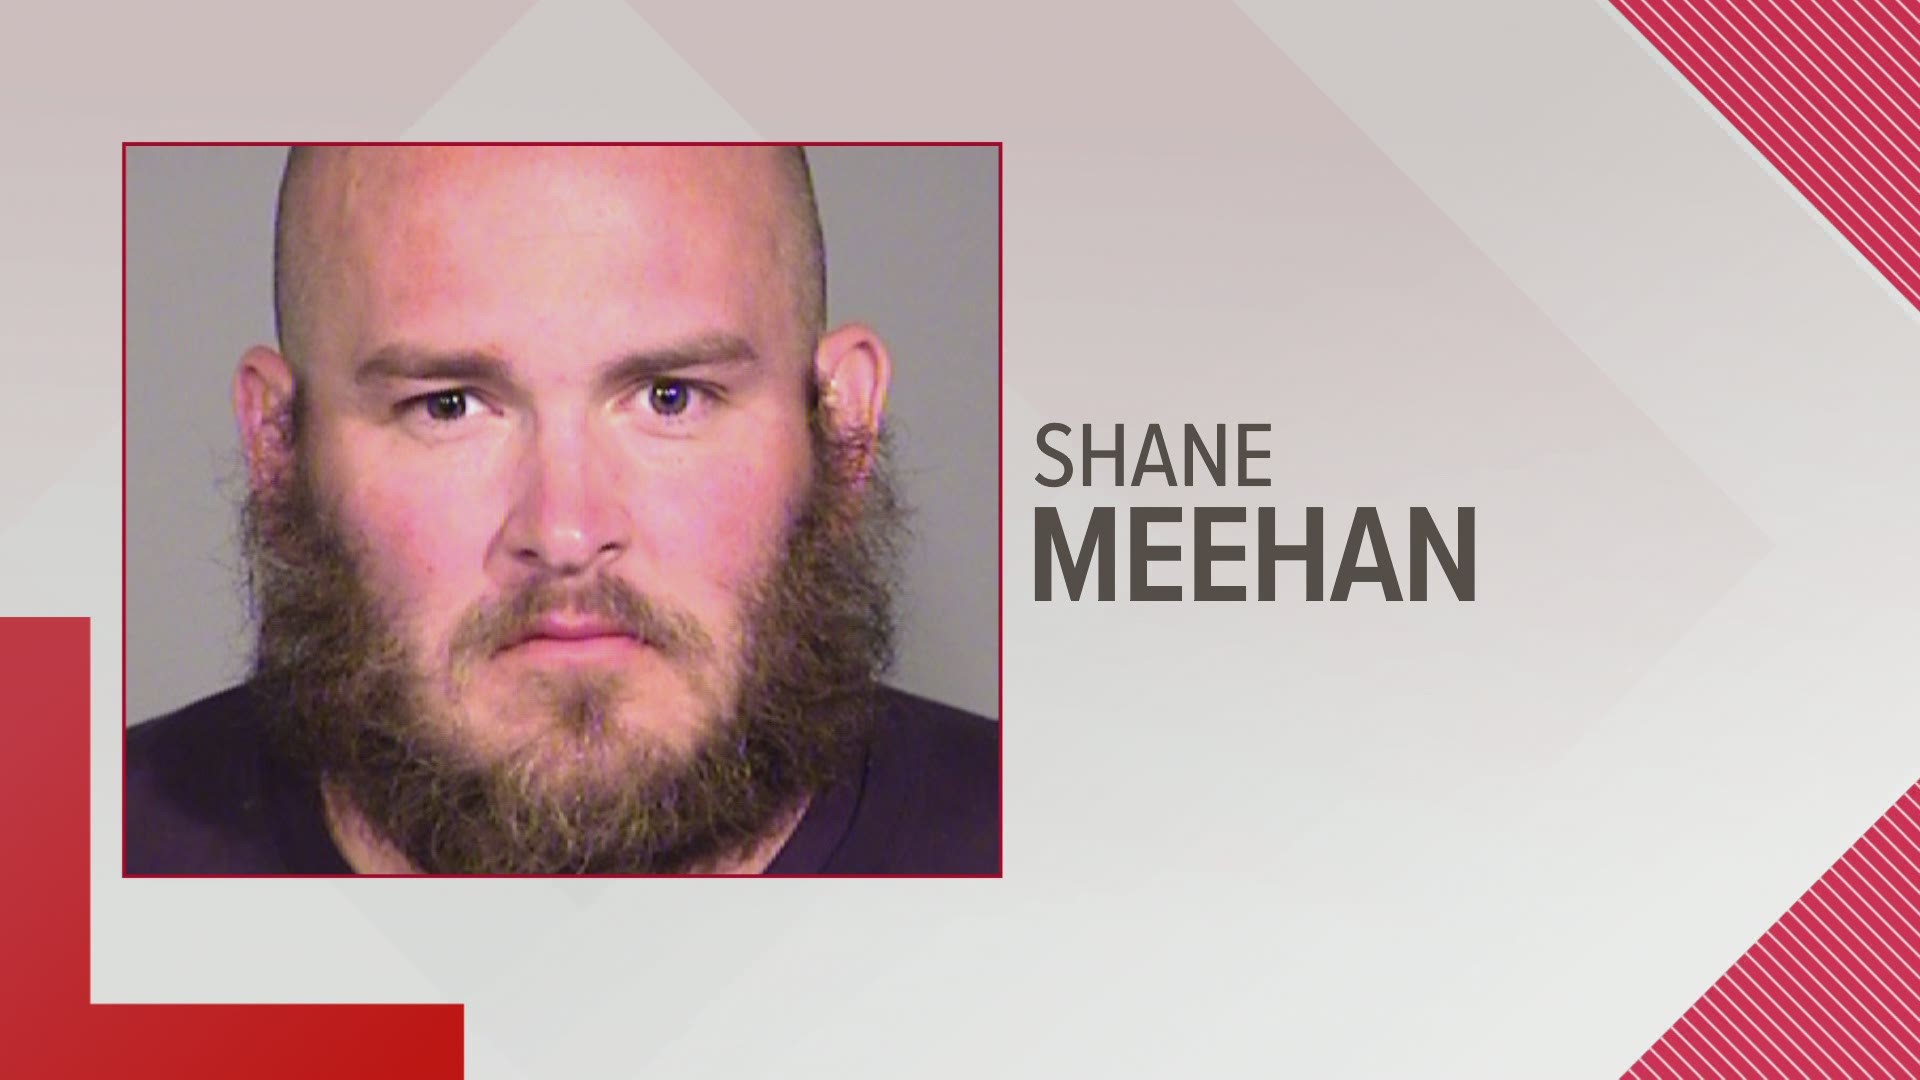 Shane Meehan is charged with the murder of a federal agent after FBI agents said they found evidence at his home.